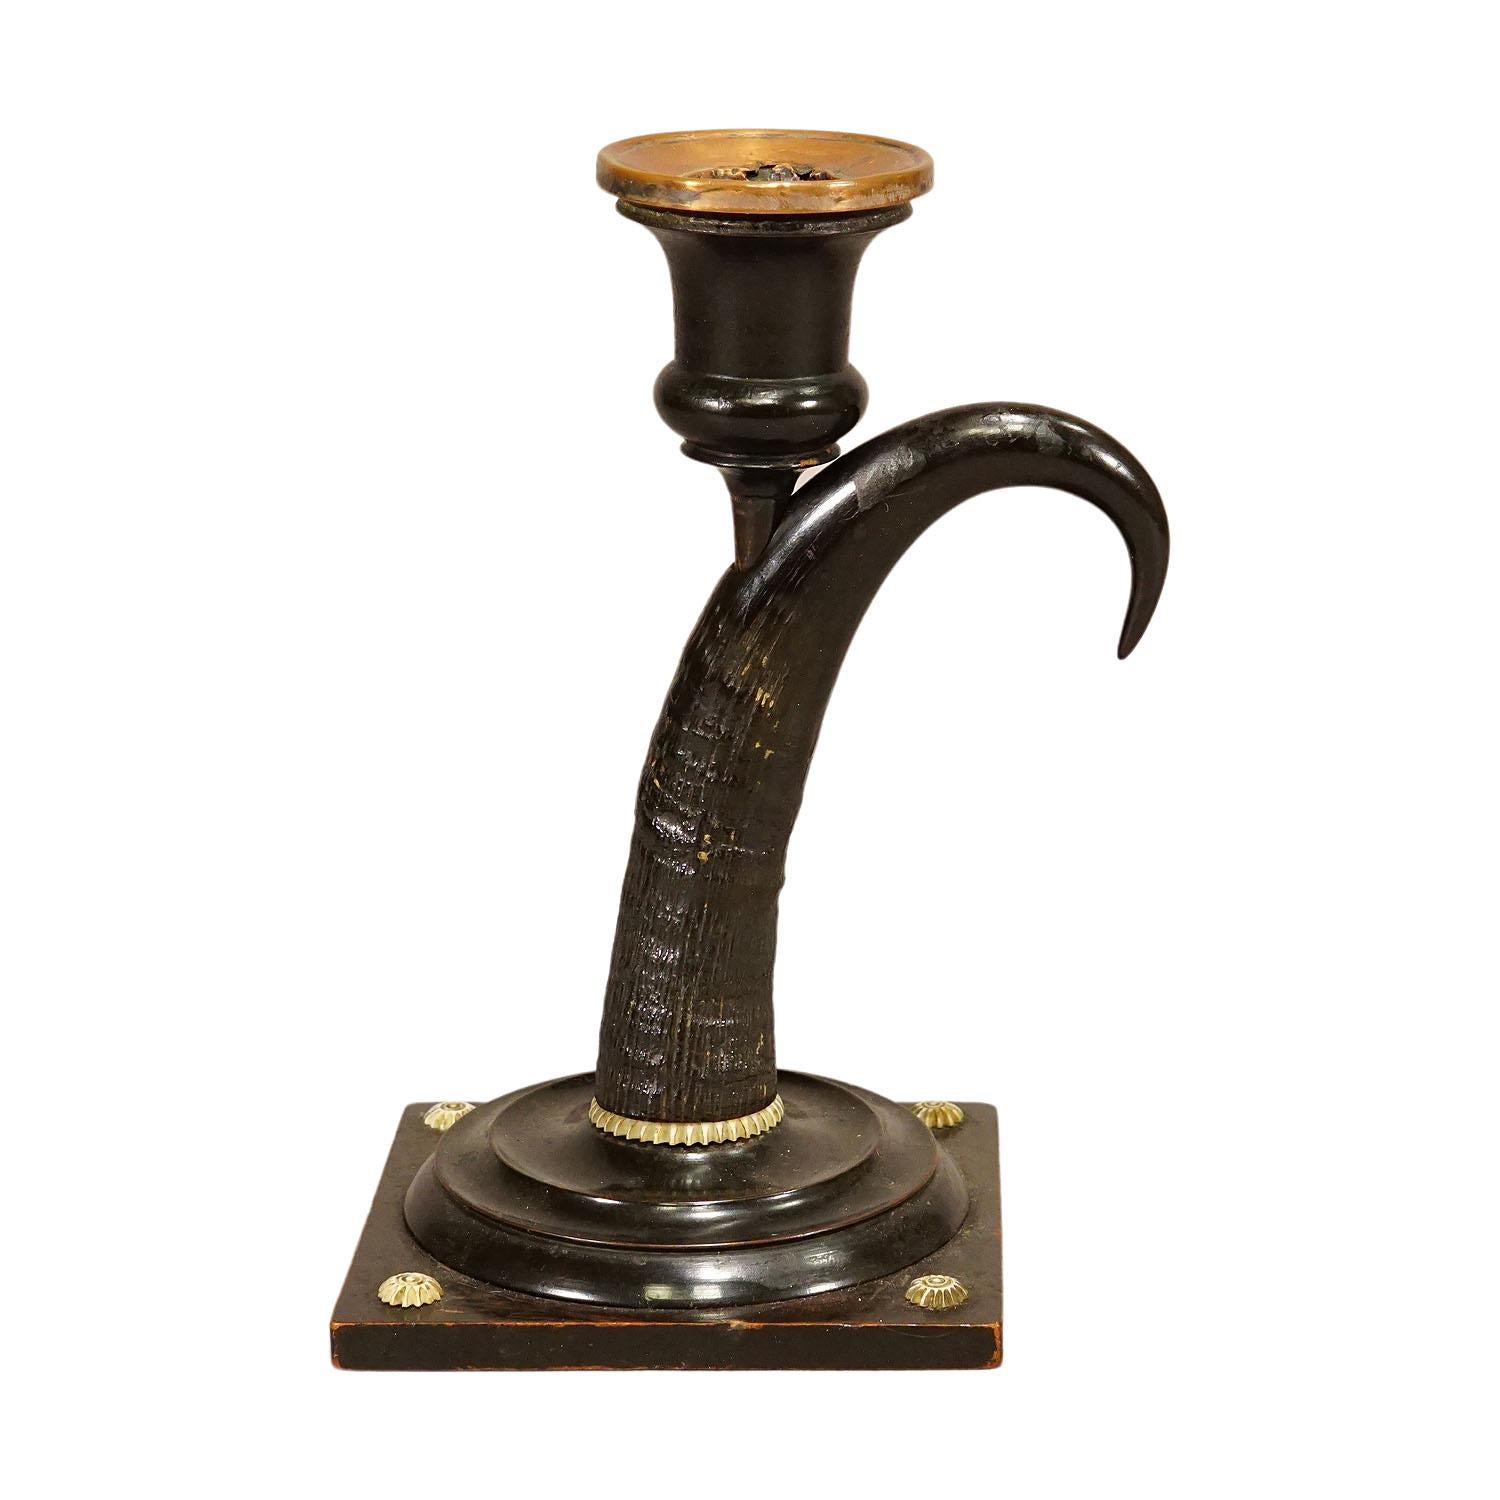 Antique Candle Stick With Real Chamois Horn, 19th century

A Victorian candle holder, made of horns from the chamois and the deer. The spout and base are made of ebonized wood. Spout with copper inset. The base features filigree carved deer horn